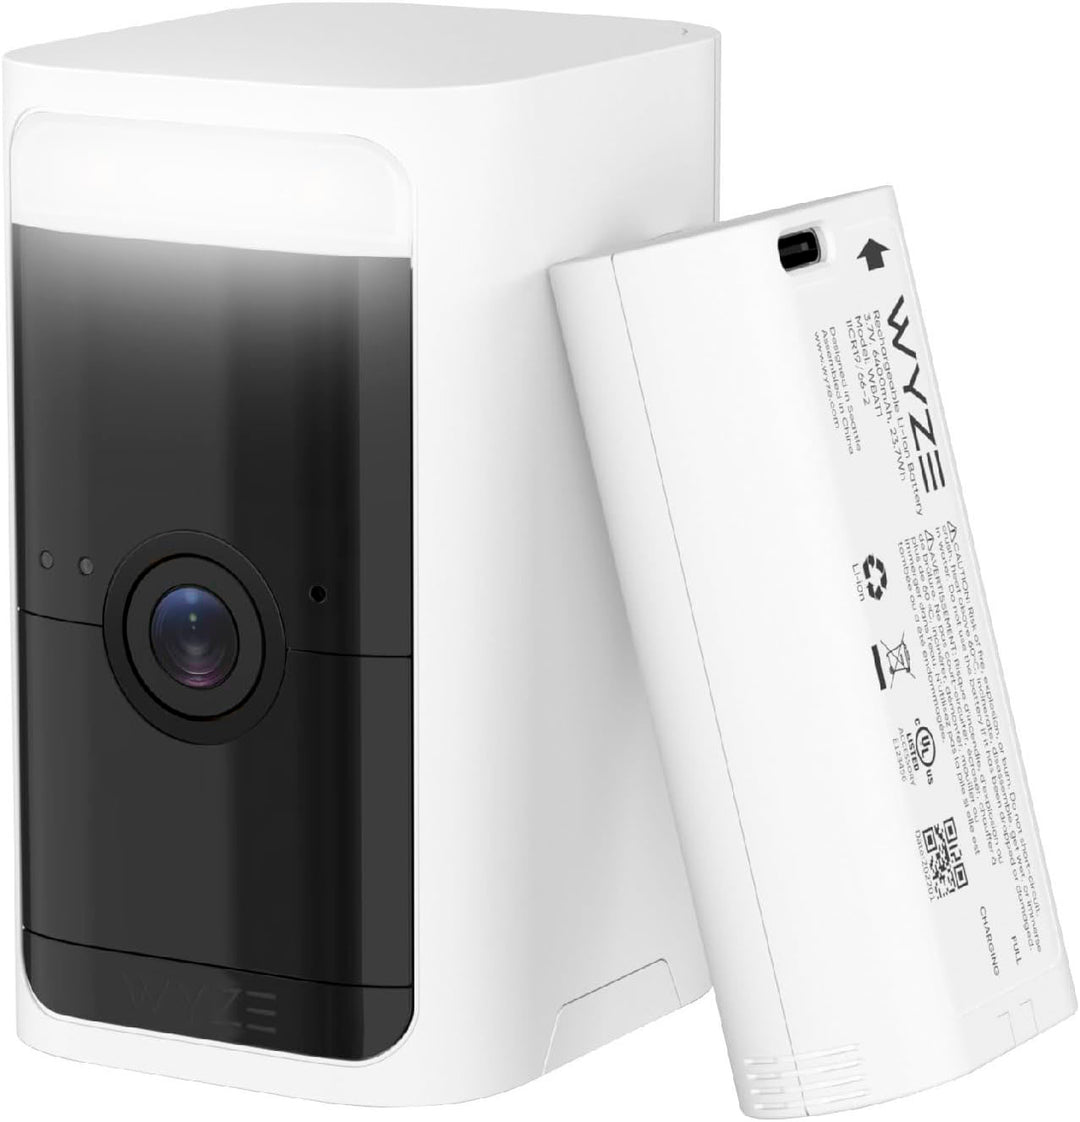 Wyze - Battery Cam Pro 2k HDR Wireless Outdoor/Indoor WiFi Security Camera with Motion Detection and Two-Way Audio - White_6